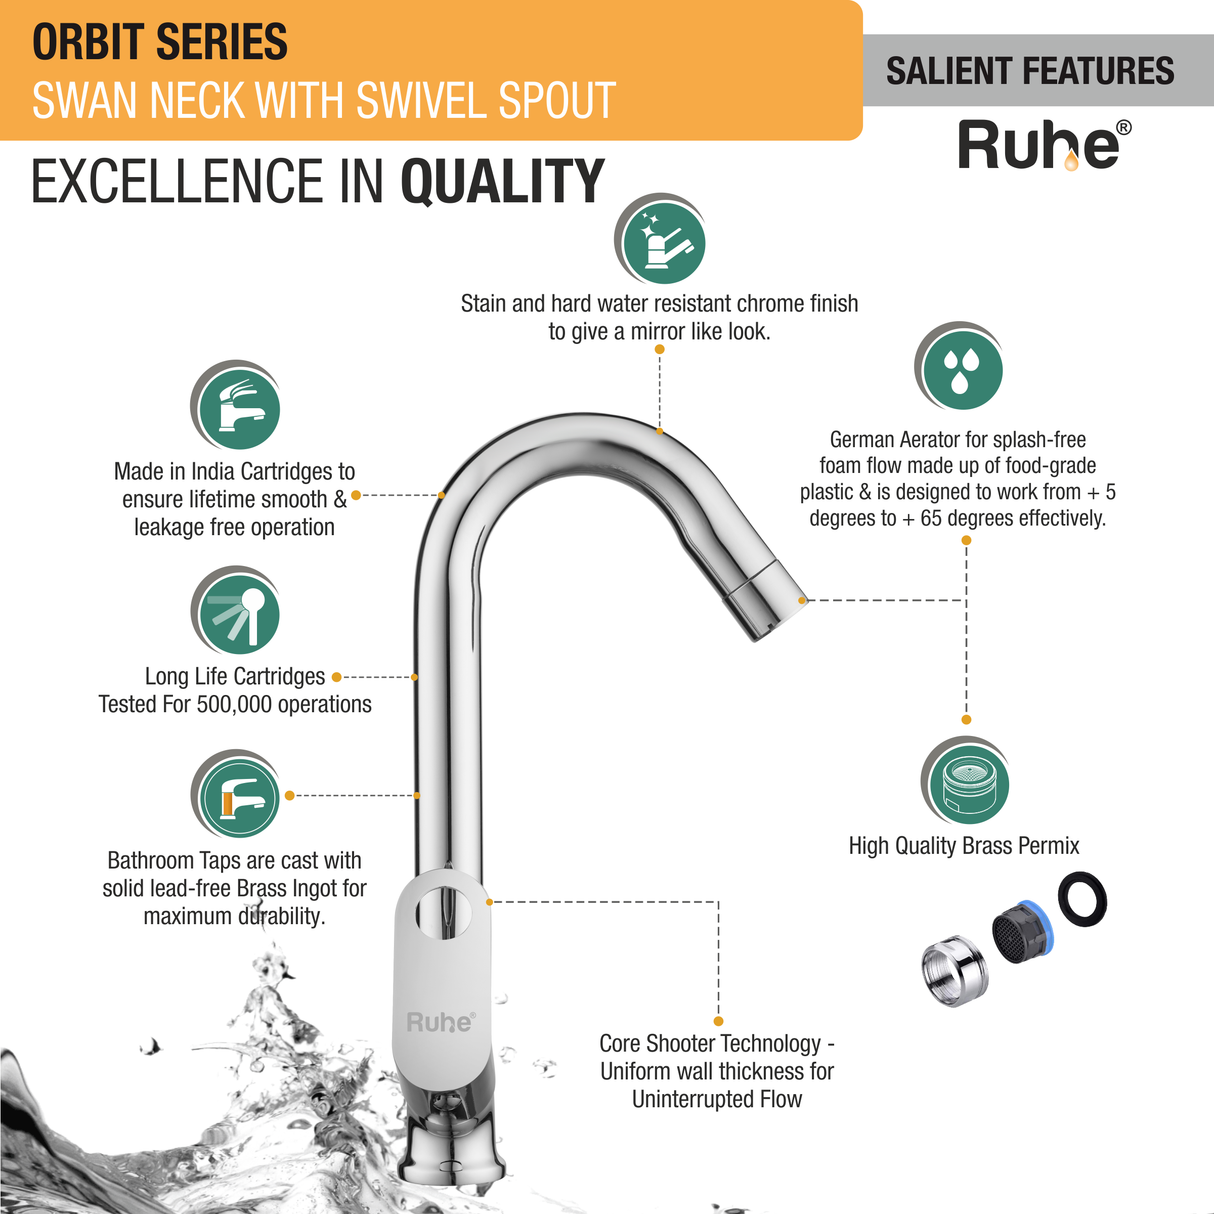 Orbit Swan Neck with Small (12 inches) Round Swivel Spout Brass Faucet features